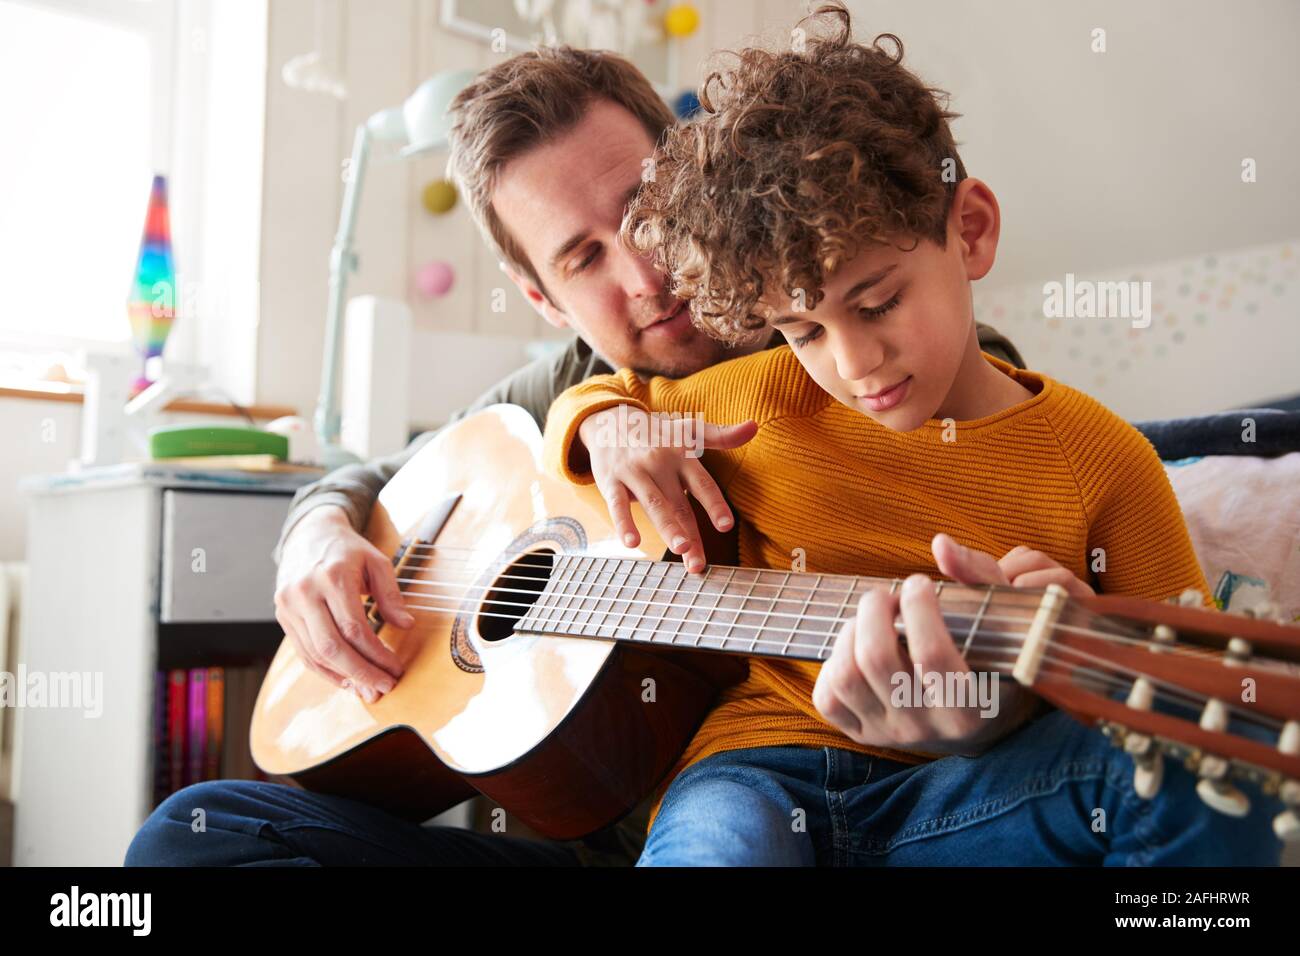 Single Father At Home With Son Teaching Him To Play Acoustic Guitar In Bedroom Stock Photo